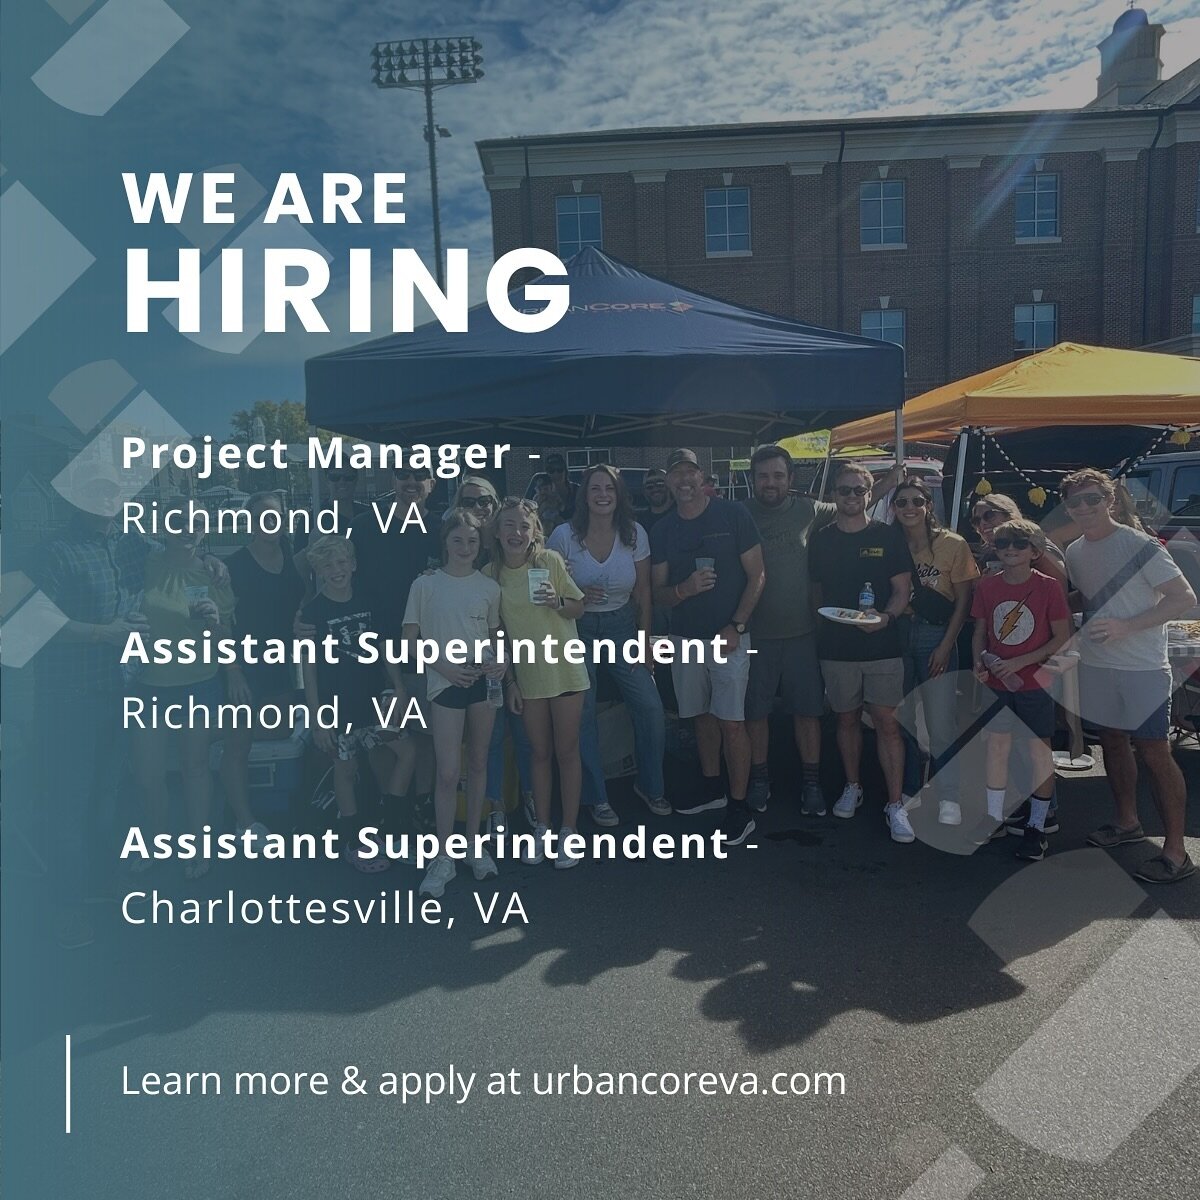 Are you excited about the work we do and want to join a FUN team dedicated to improving ourselves and our communities?

UrbanCore is hiring for 3 key positions: Assistant Superintendent based in Richmond, Assistant Superintendent based in Charlottesv